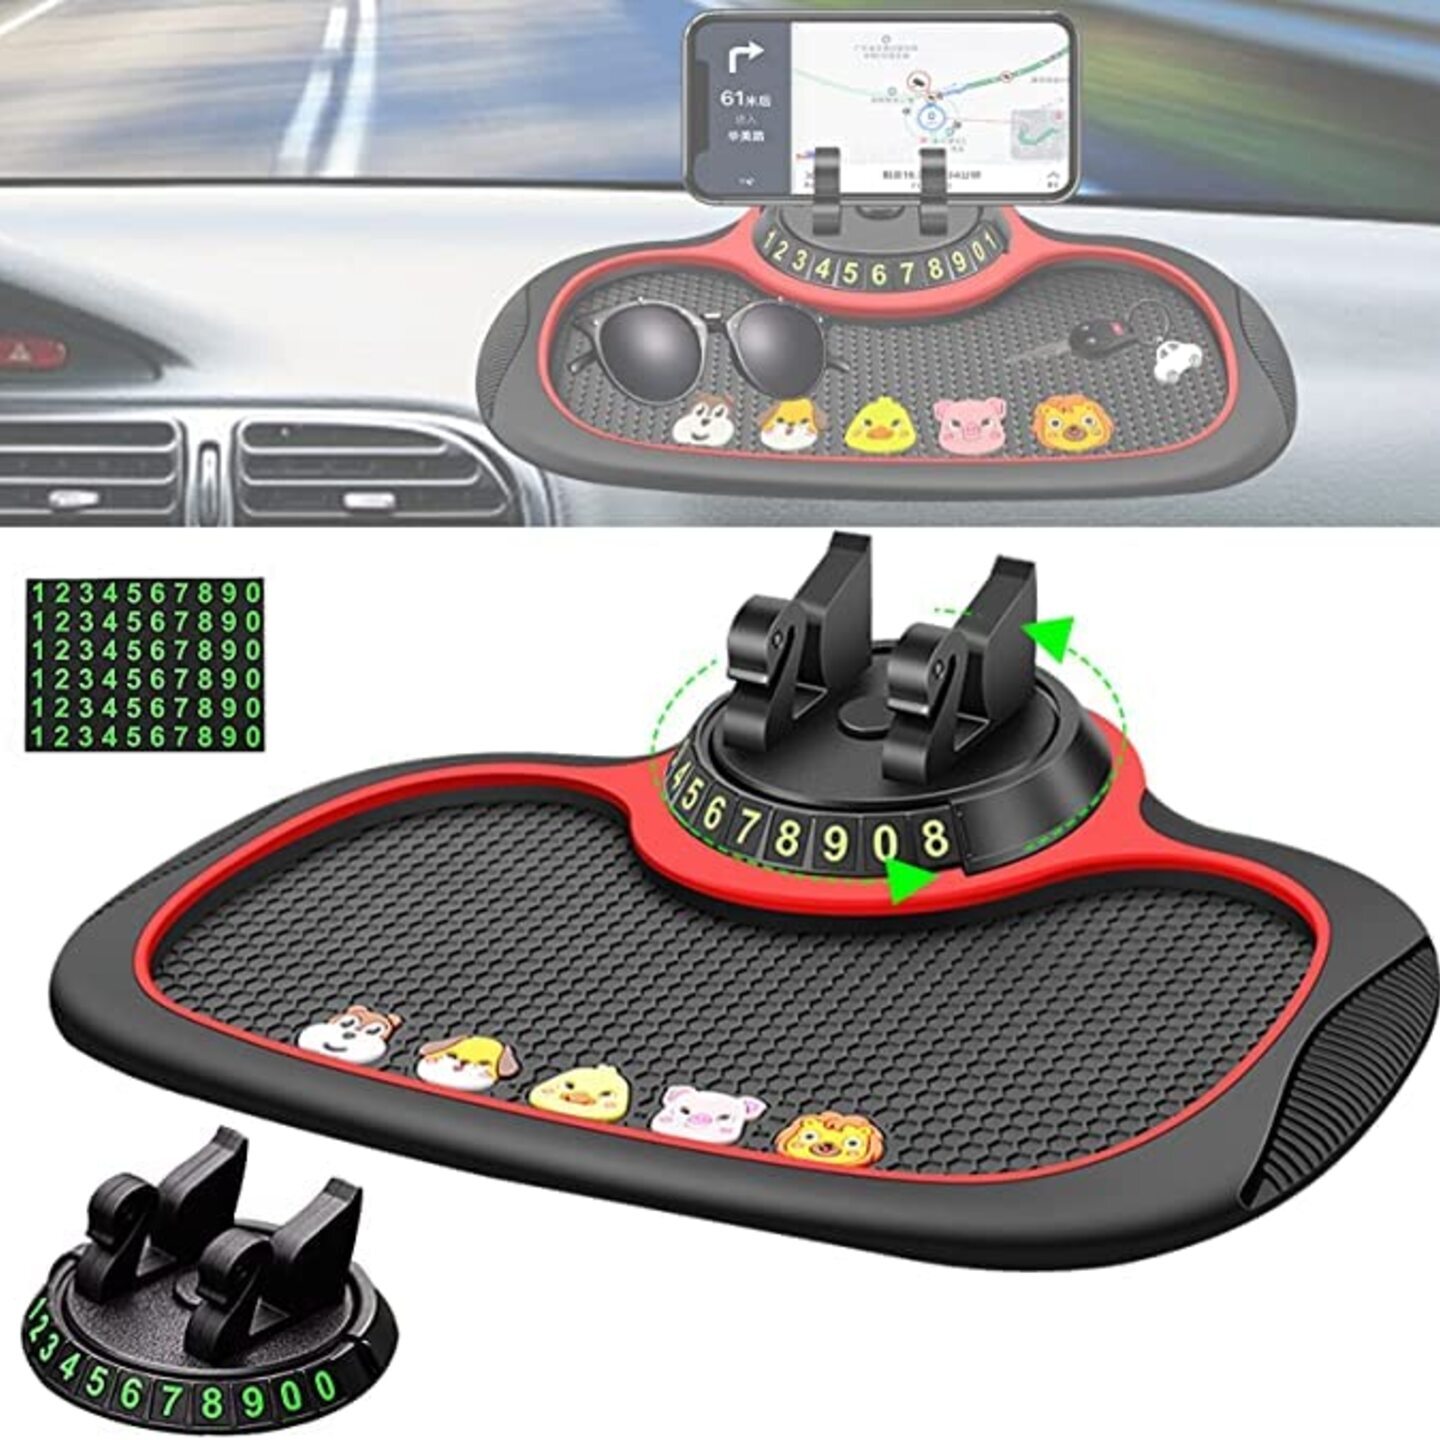 Anti-Slip Rubber Mat with Phone Holder for Car Dashboard - holds Sunglasses, Keys, Gadgets and more